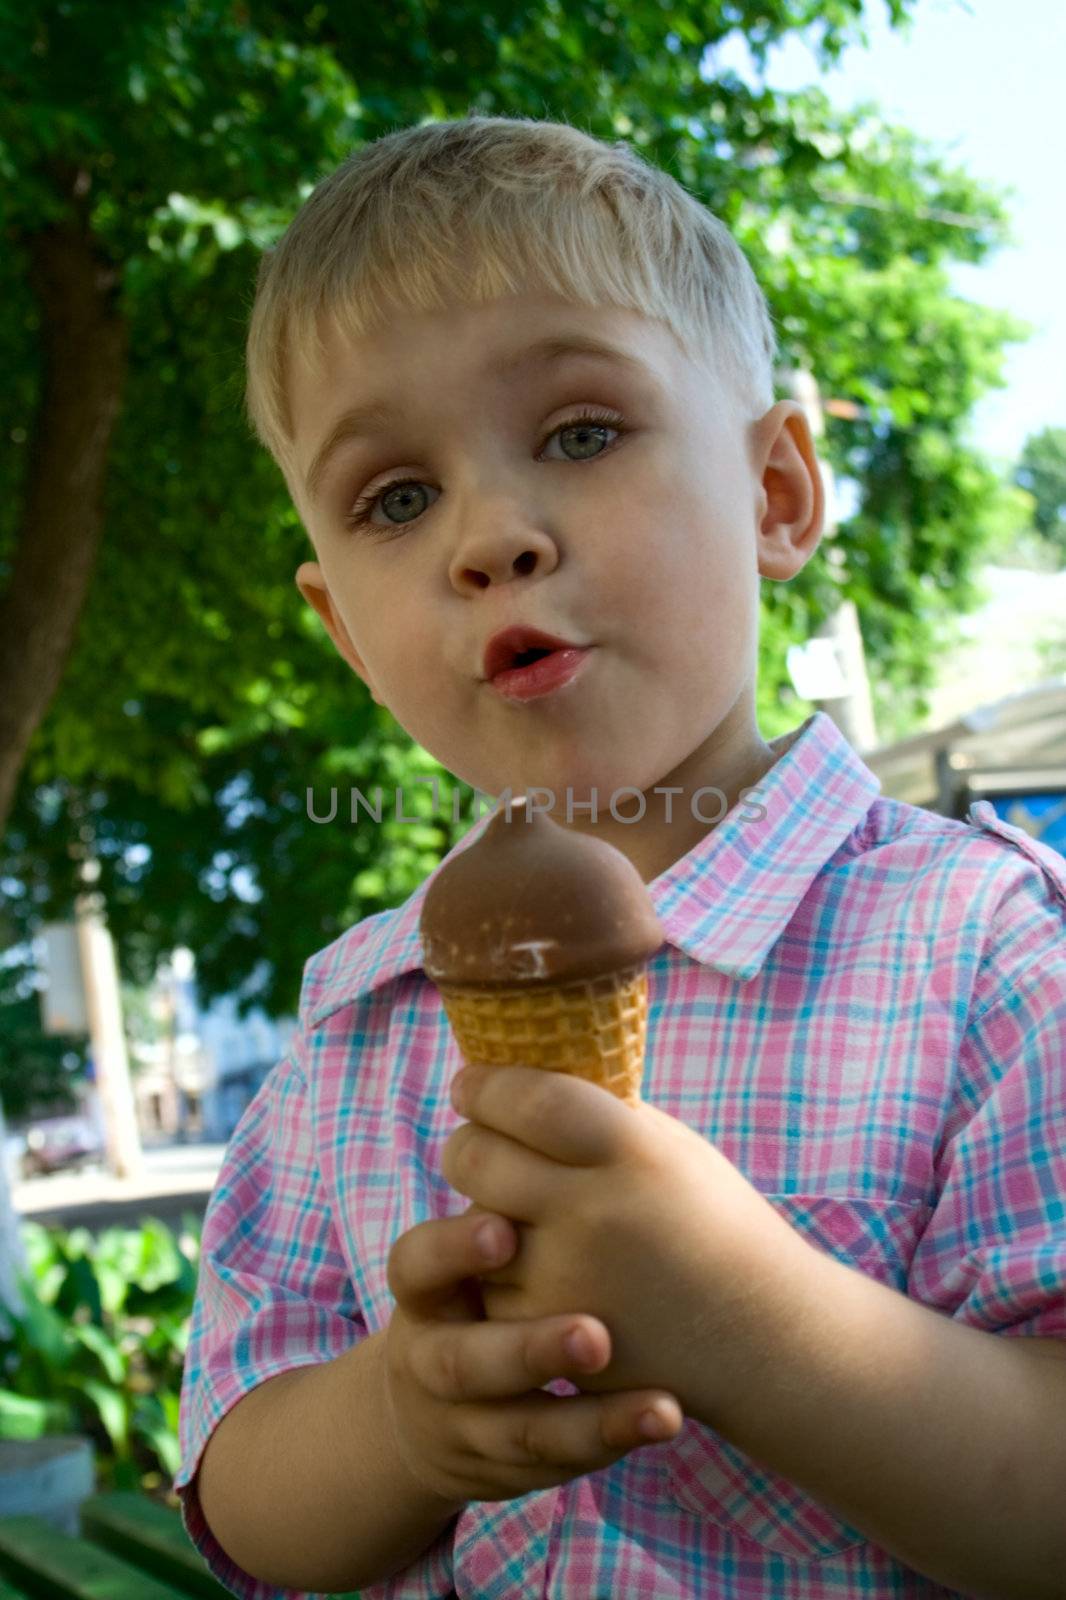 The little boy holds ice-cream. Emotion of surprise